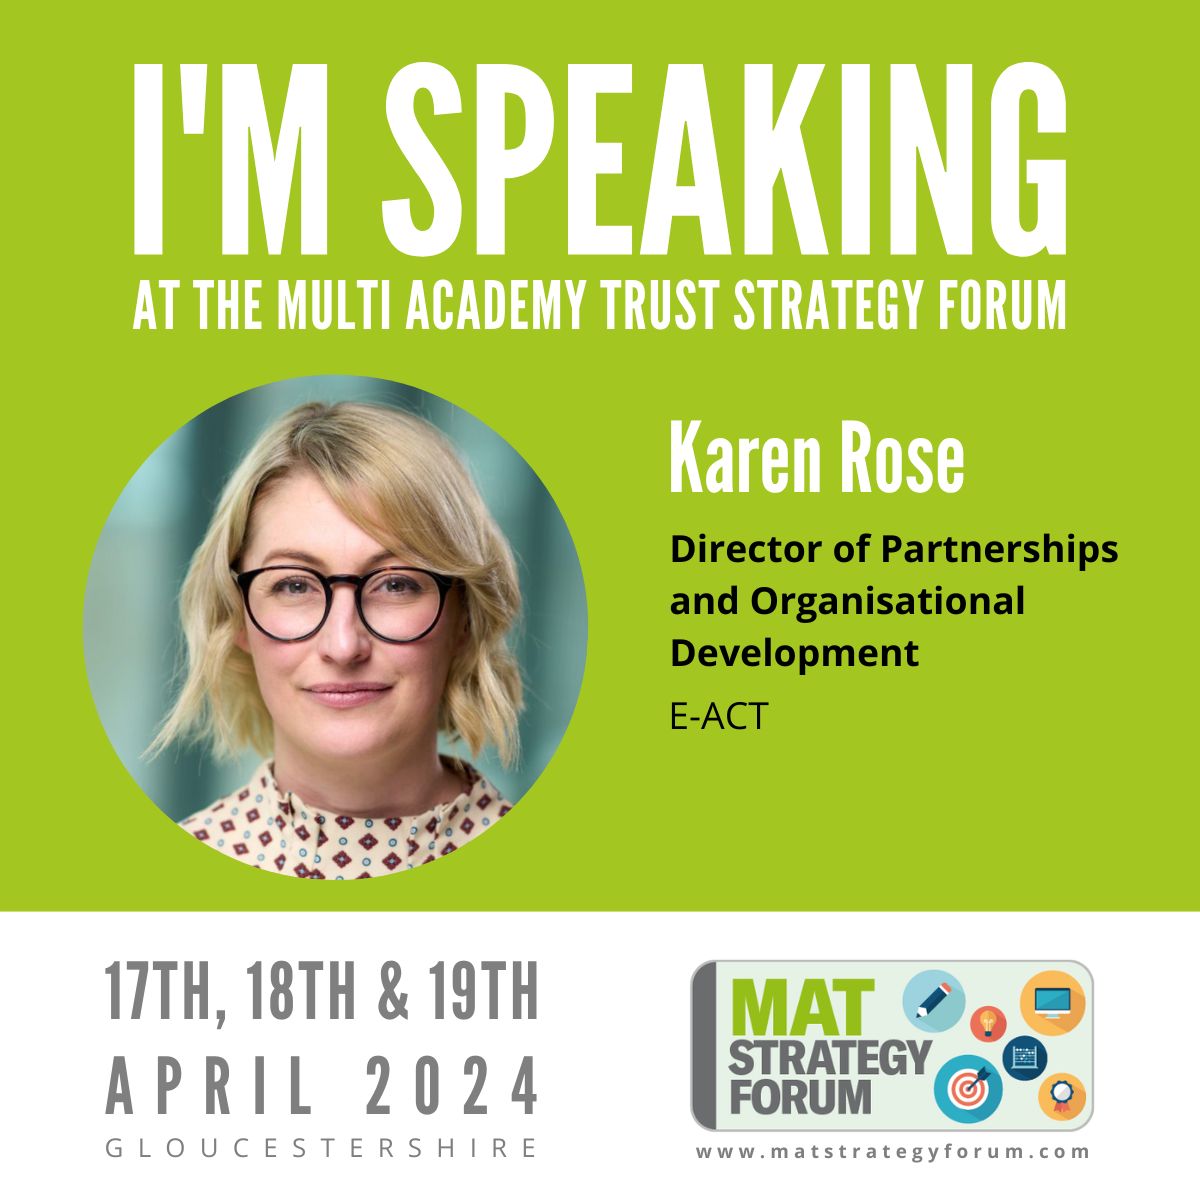 📢Exciting Announcement📢 We are delighted to share that @TomCampbell111 and @KarenAnnaRose will be speaking at The @MATStratForum next week! They are going to be talking about developing a plan for MAT growth. #MATStratForum #WeAreEACT #thinkbig #growth